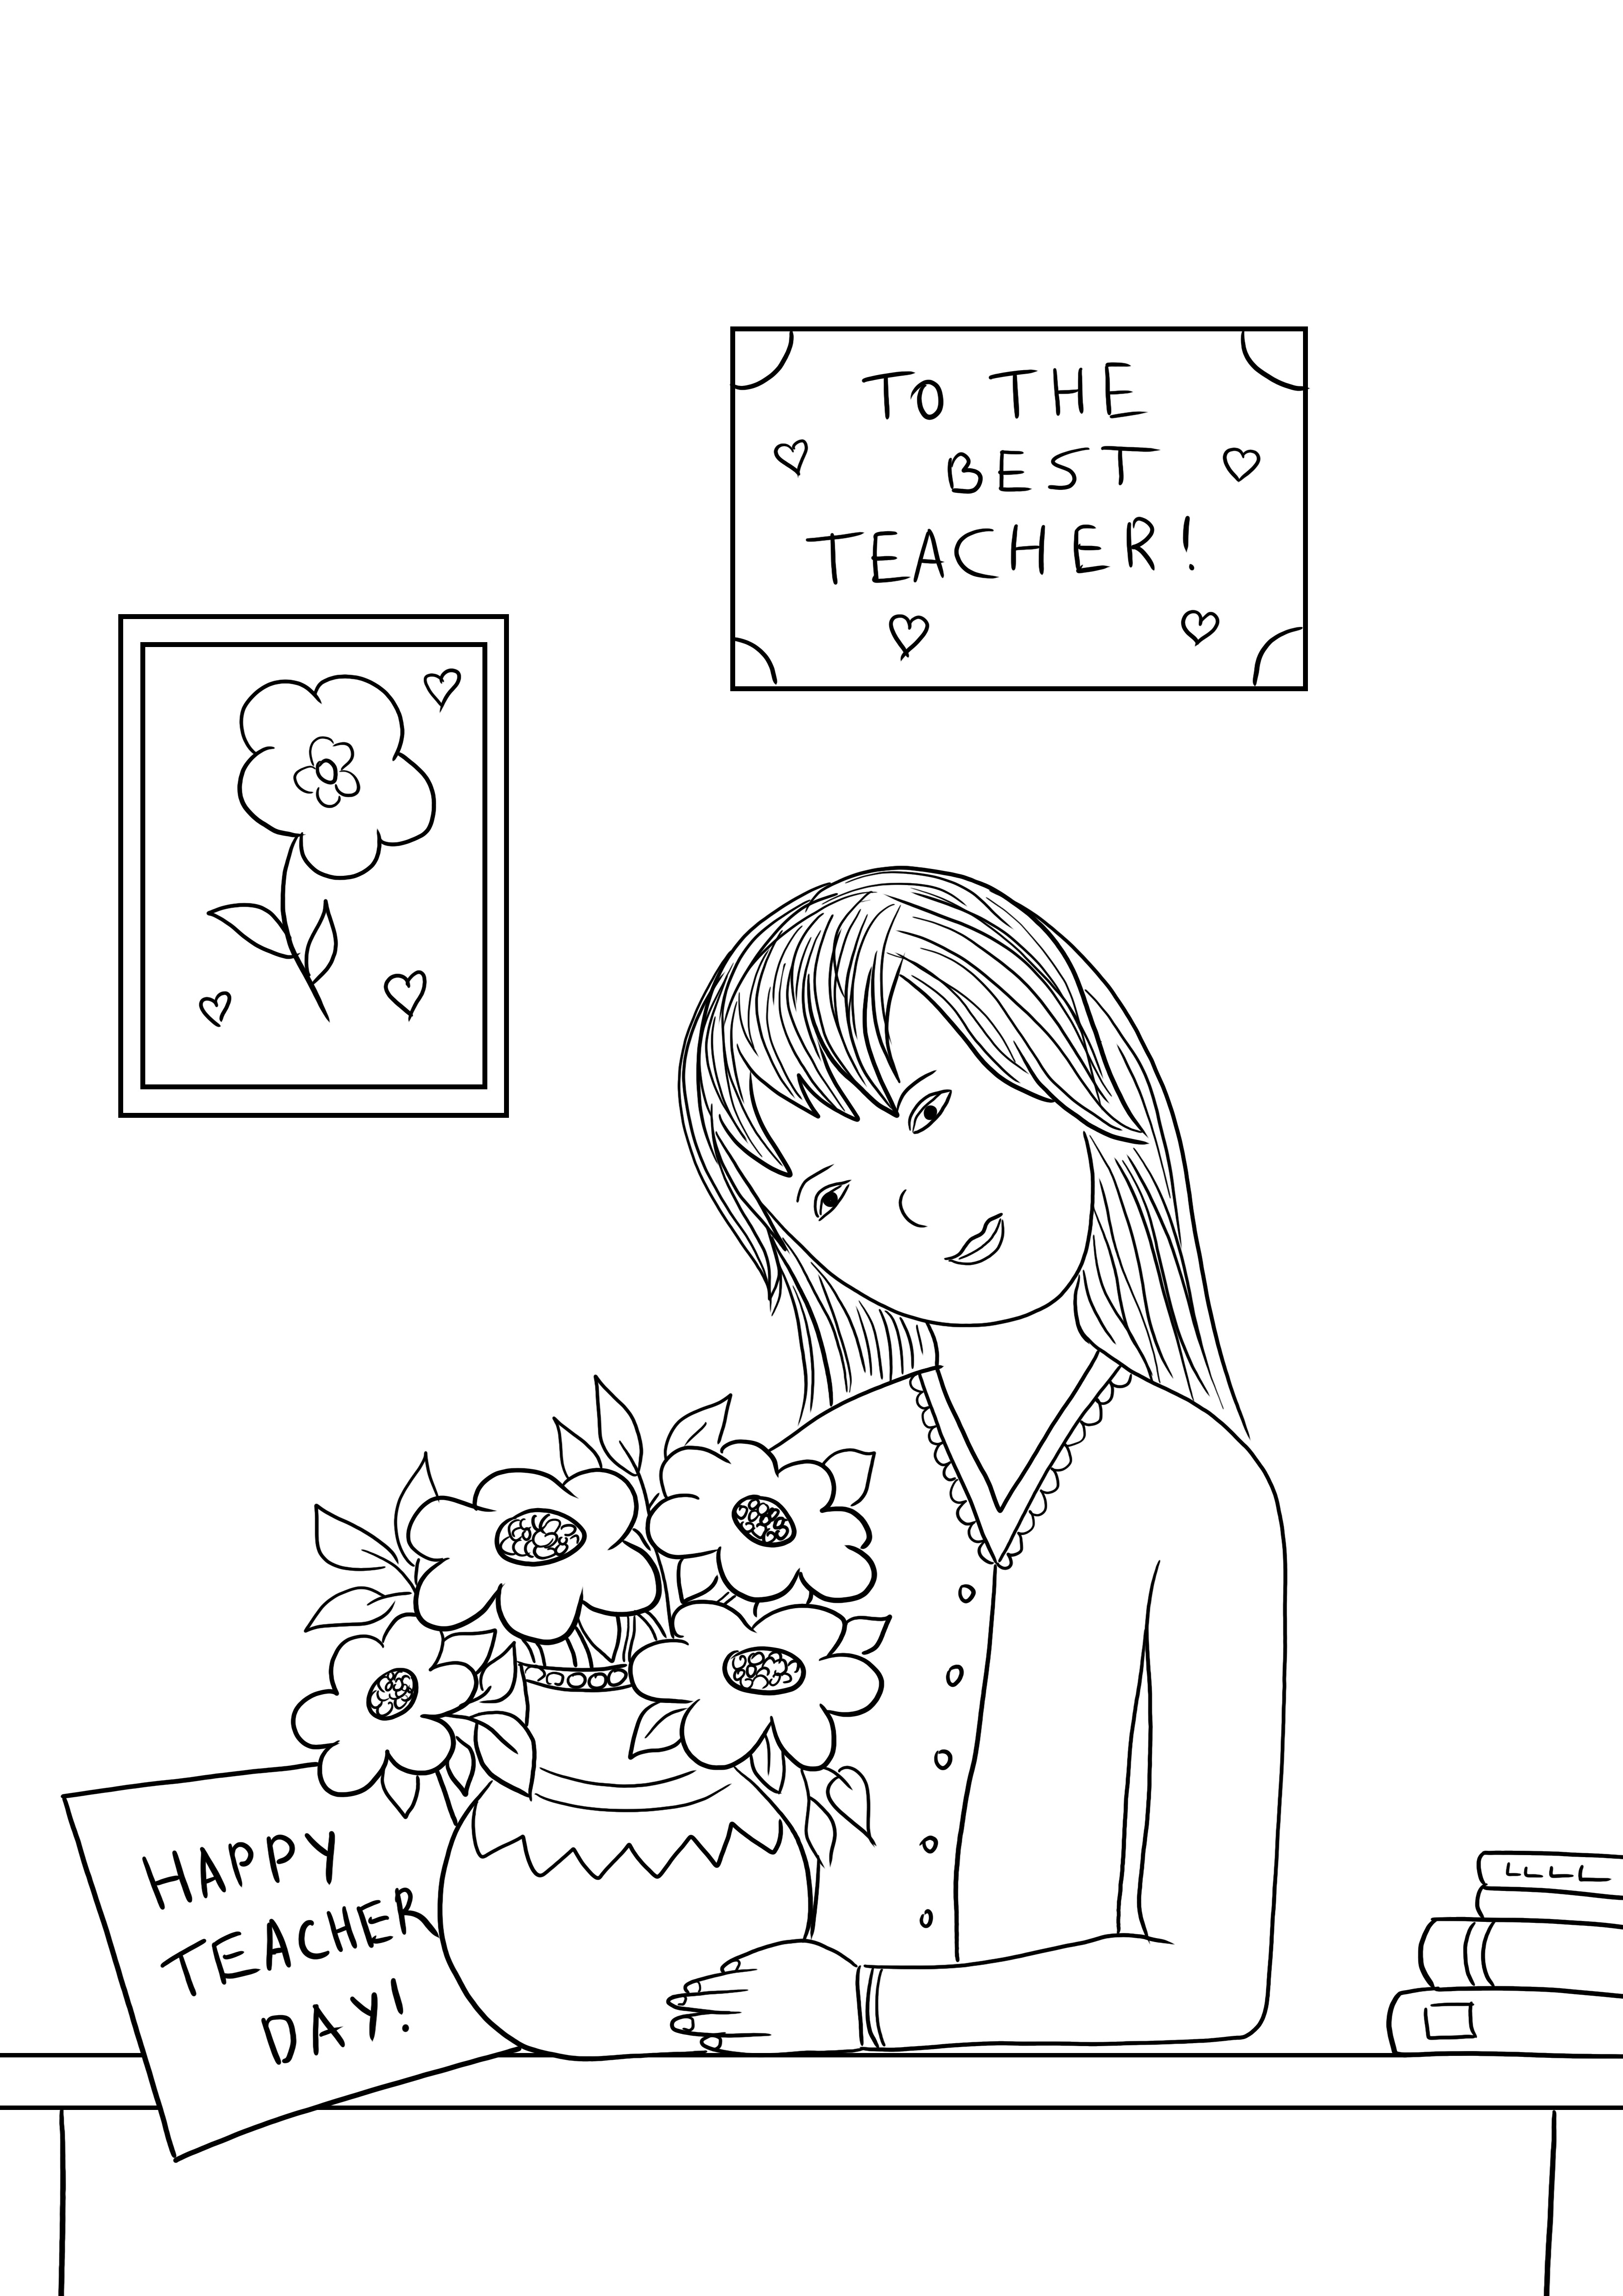 Teachers Day Coloring Card Free Printable